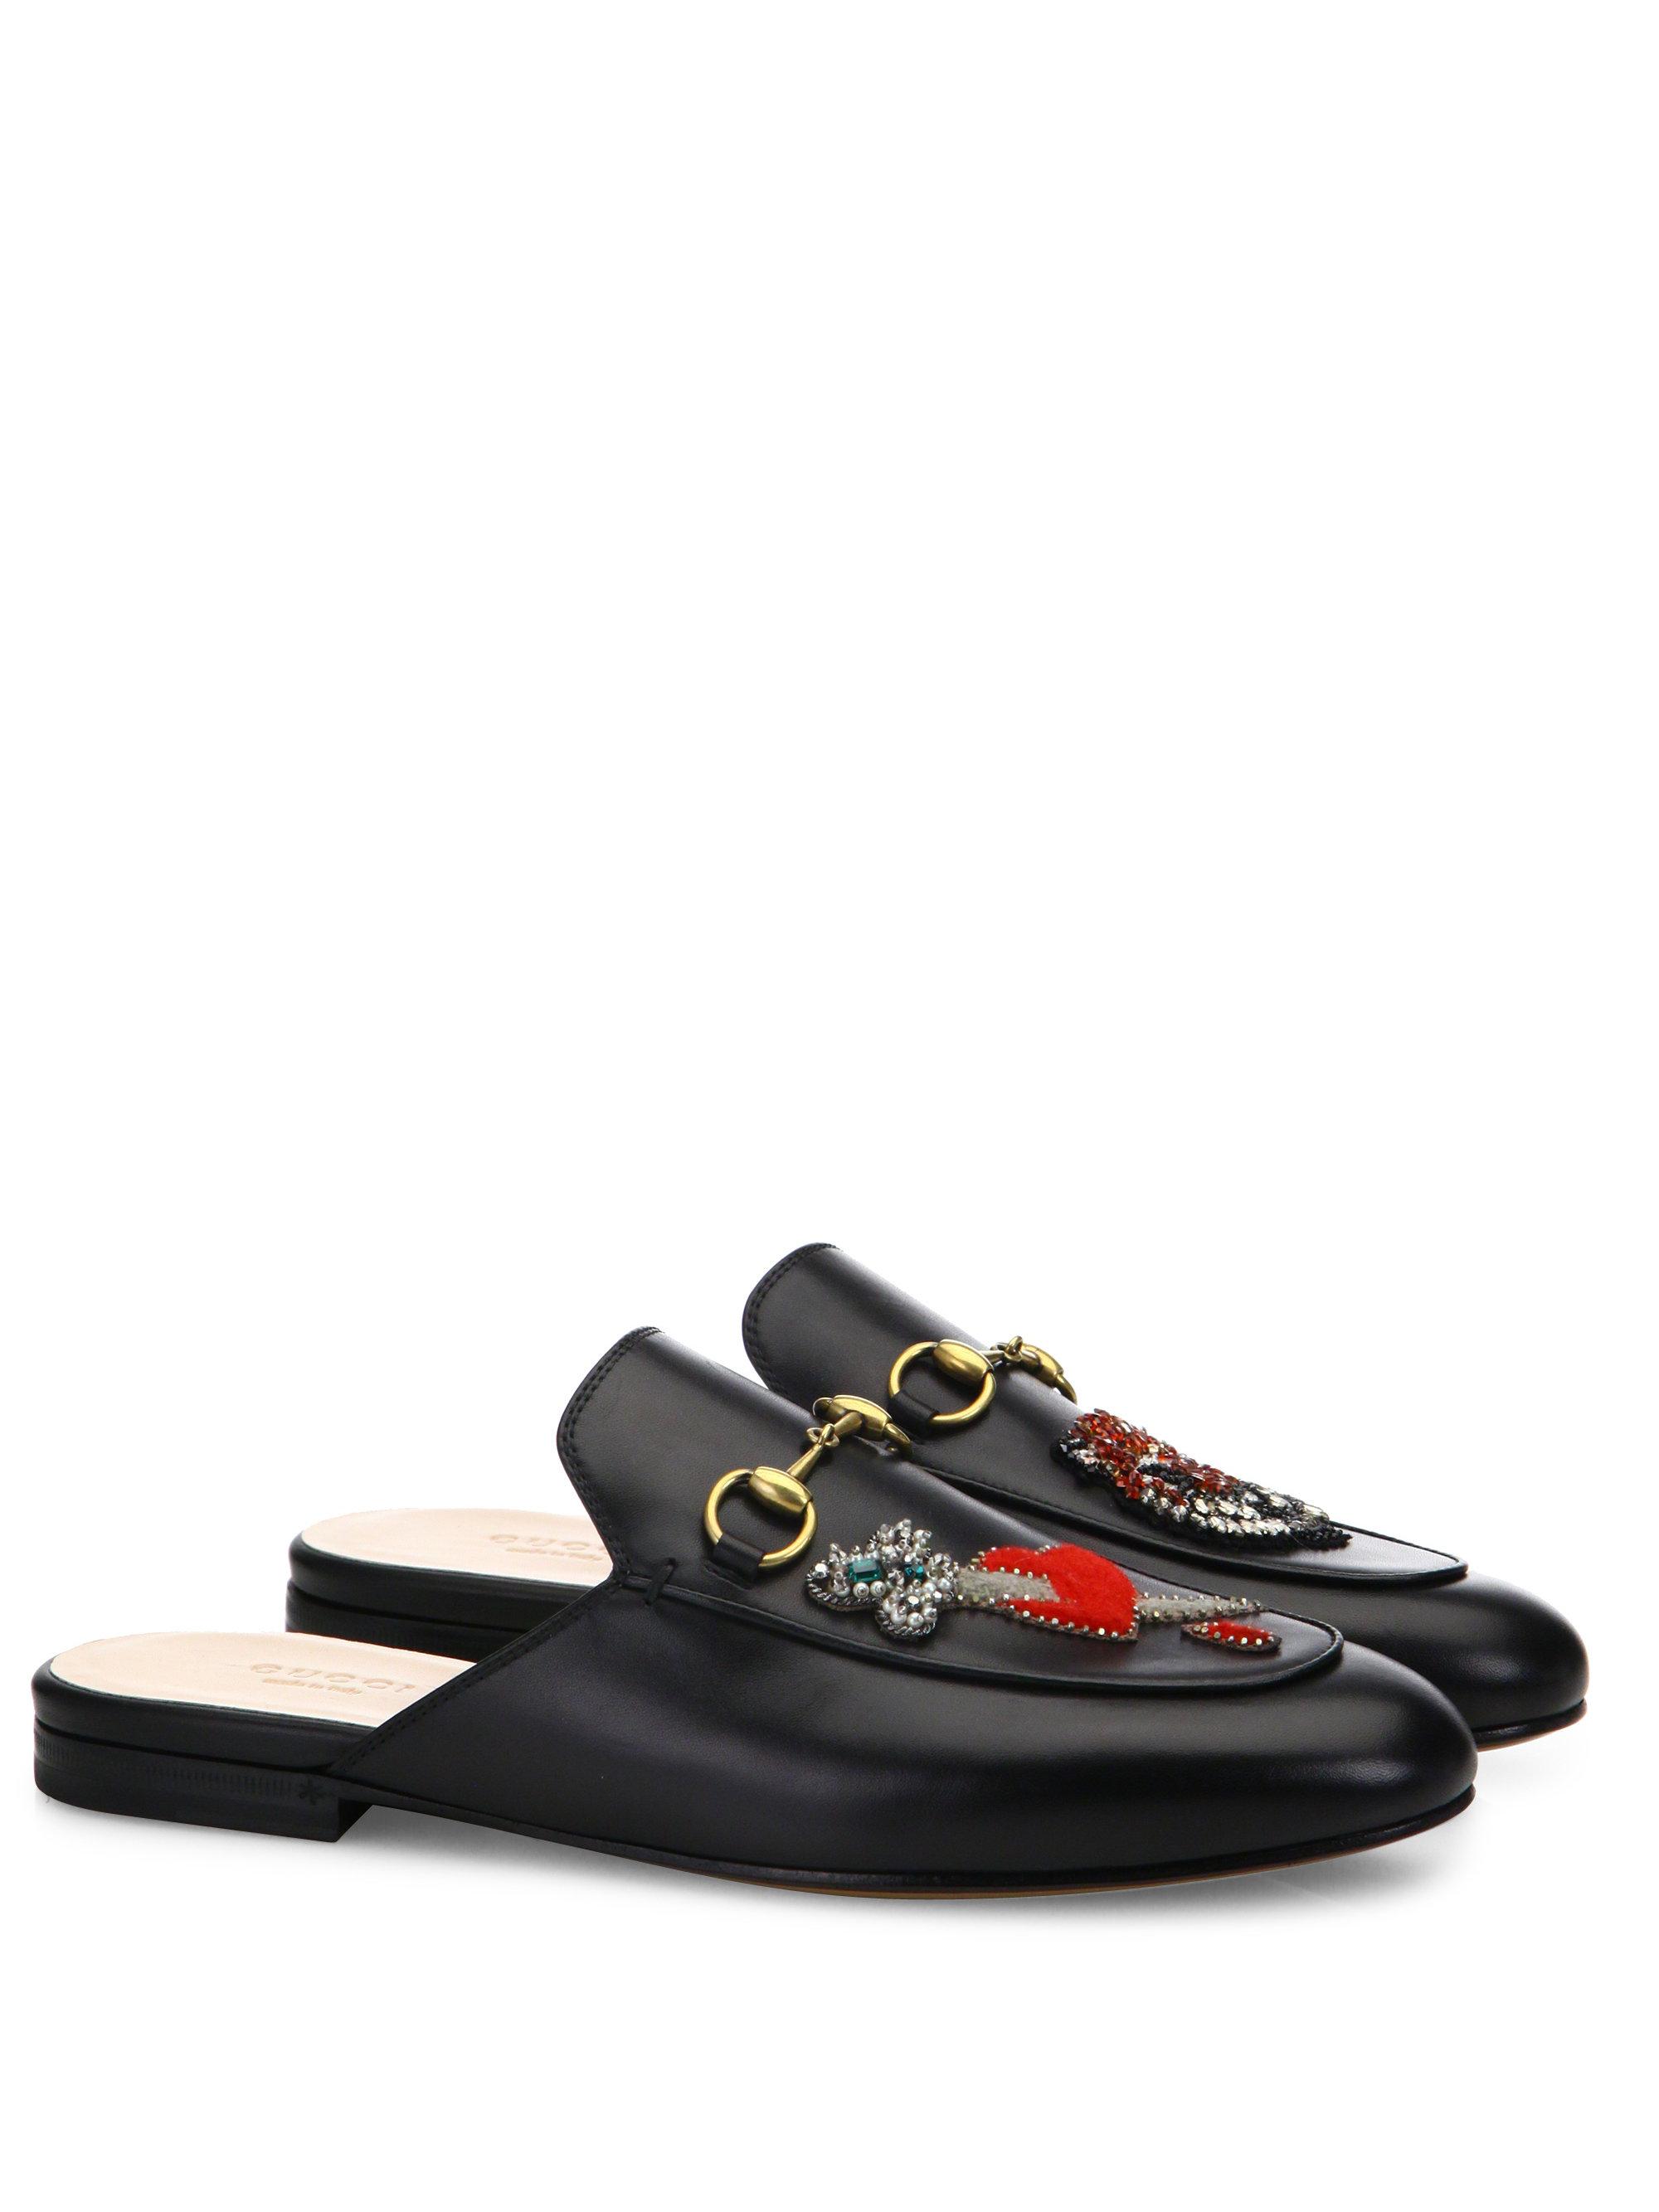 Gucci Princetown Embroidered Leather 